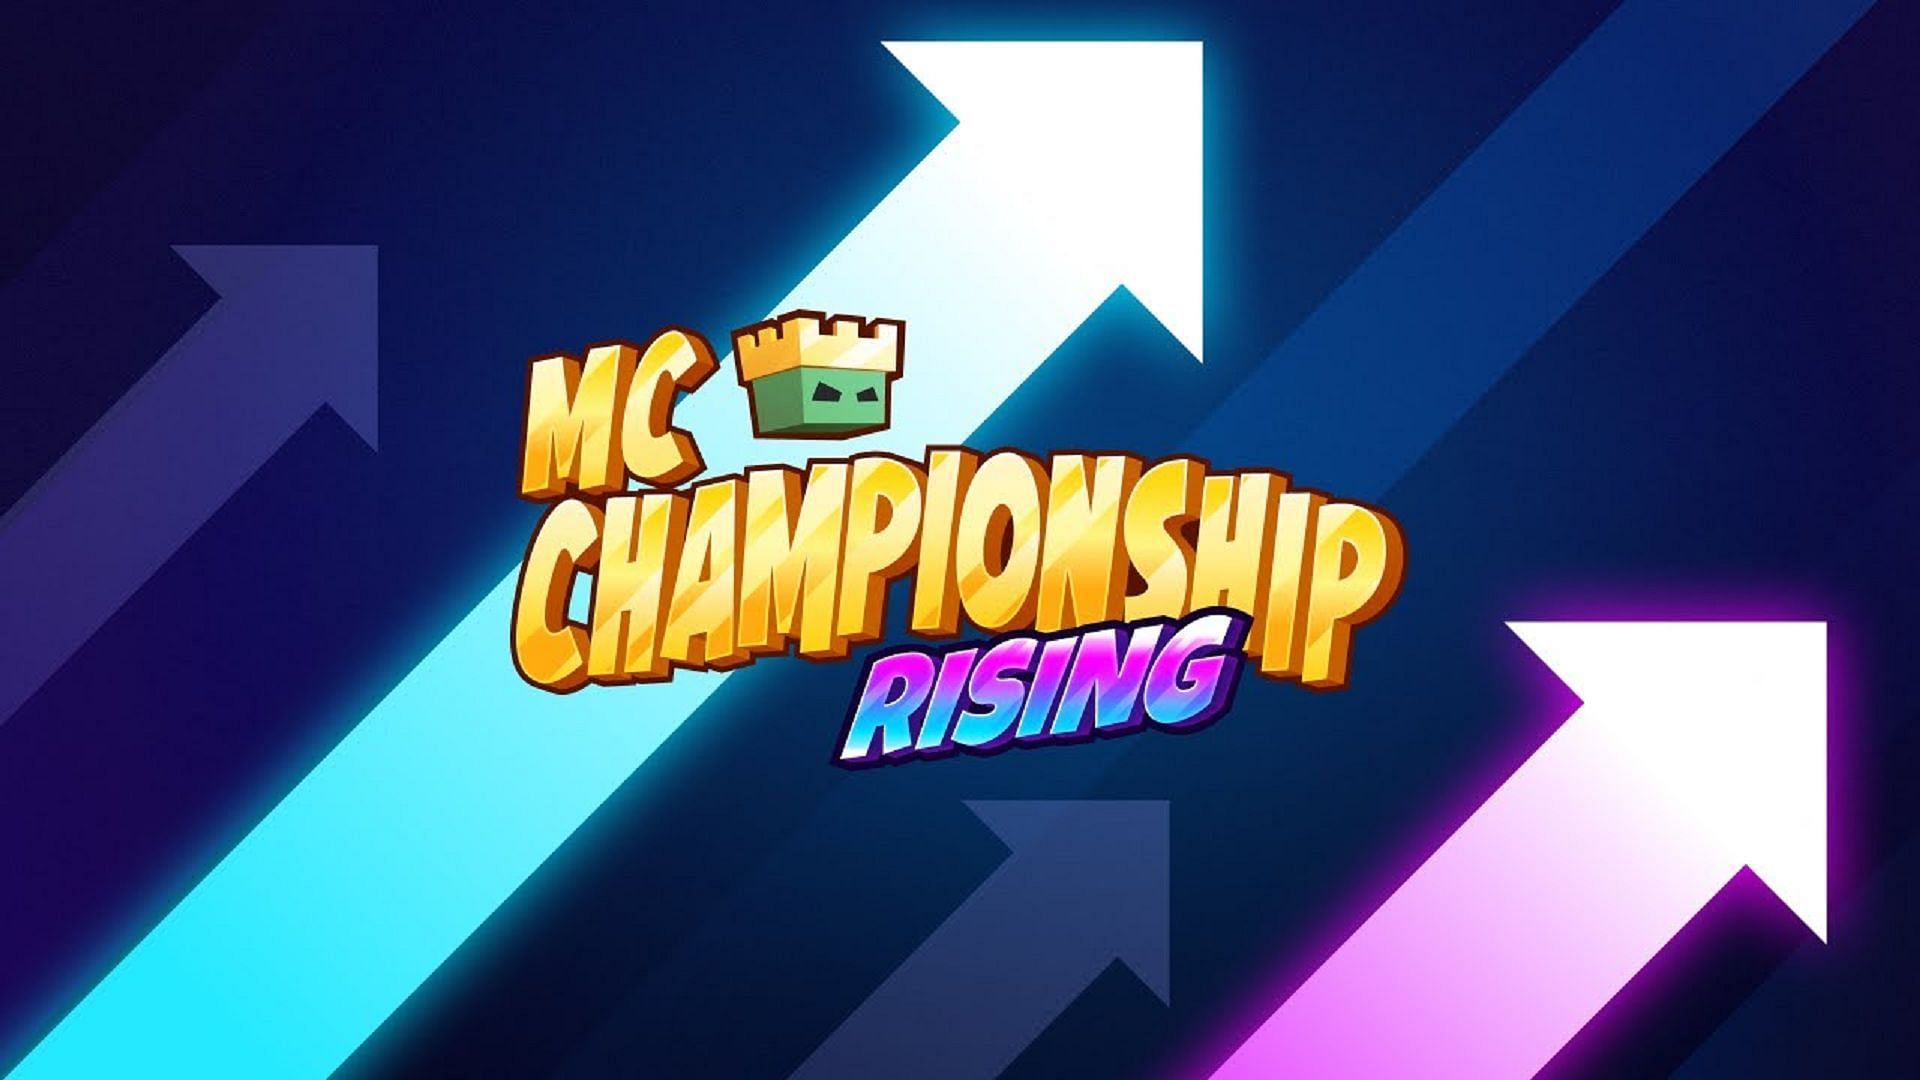 The latest non-canon Minecraft Championship event has been confirmed by the organizers at Noxcrew (Image via Noxcrew/YouTube)